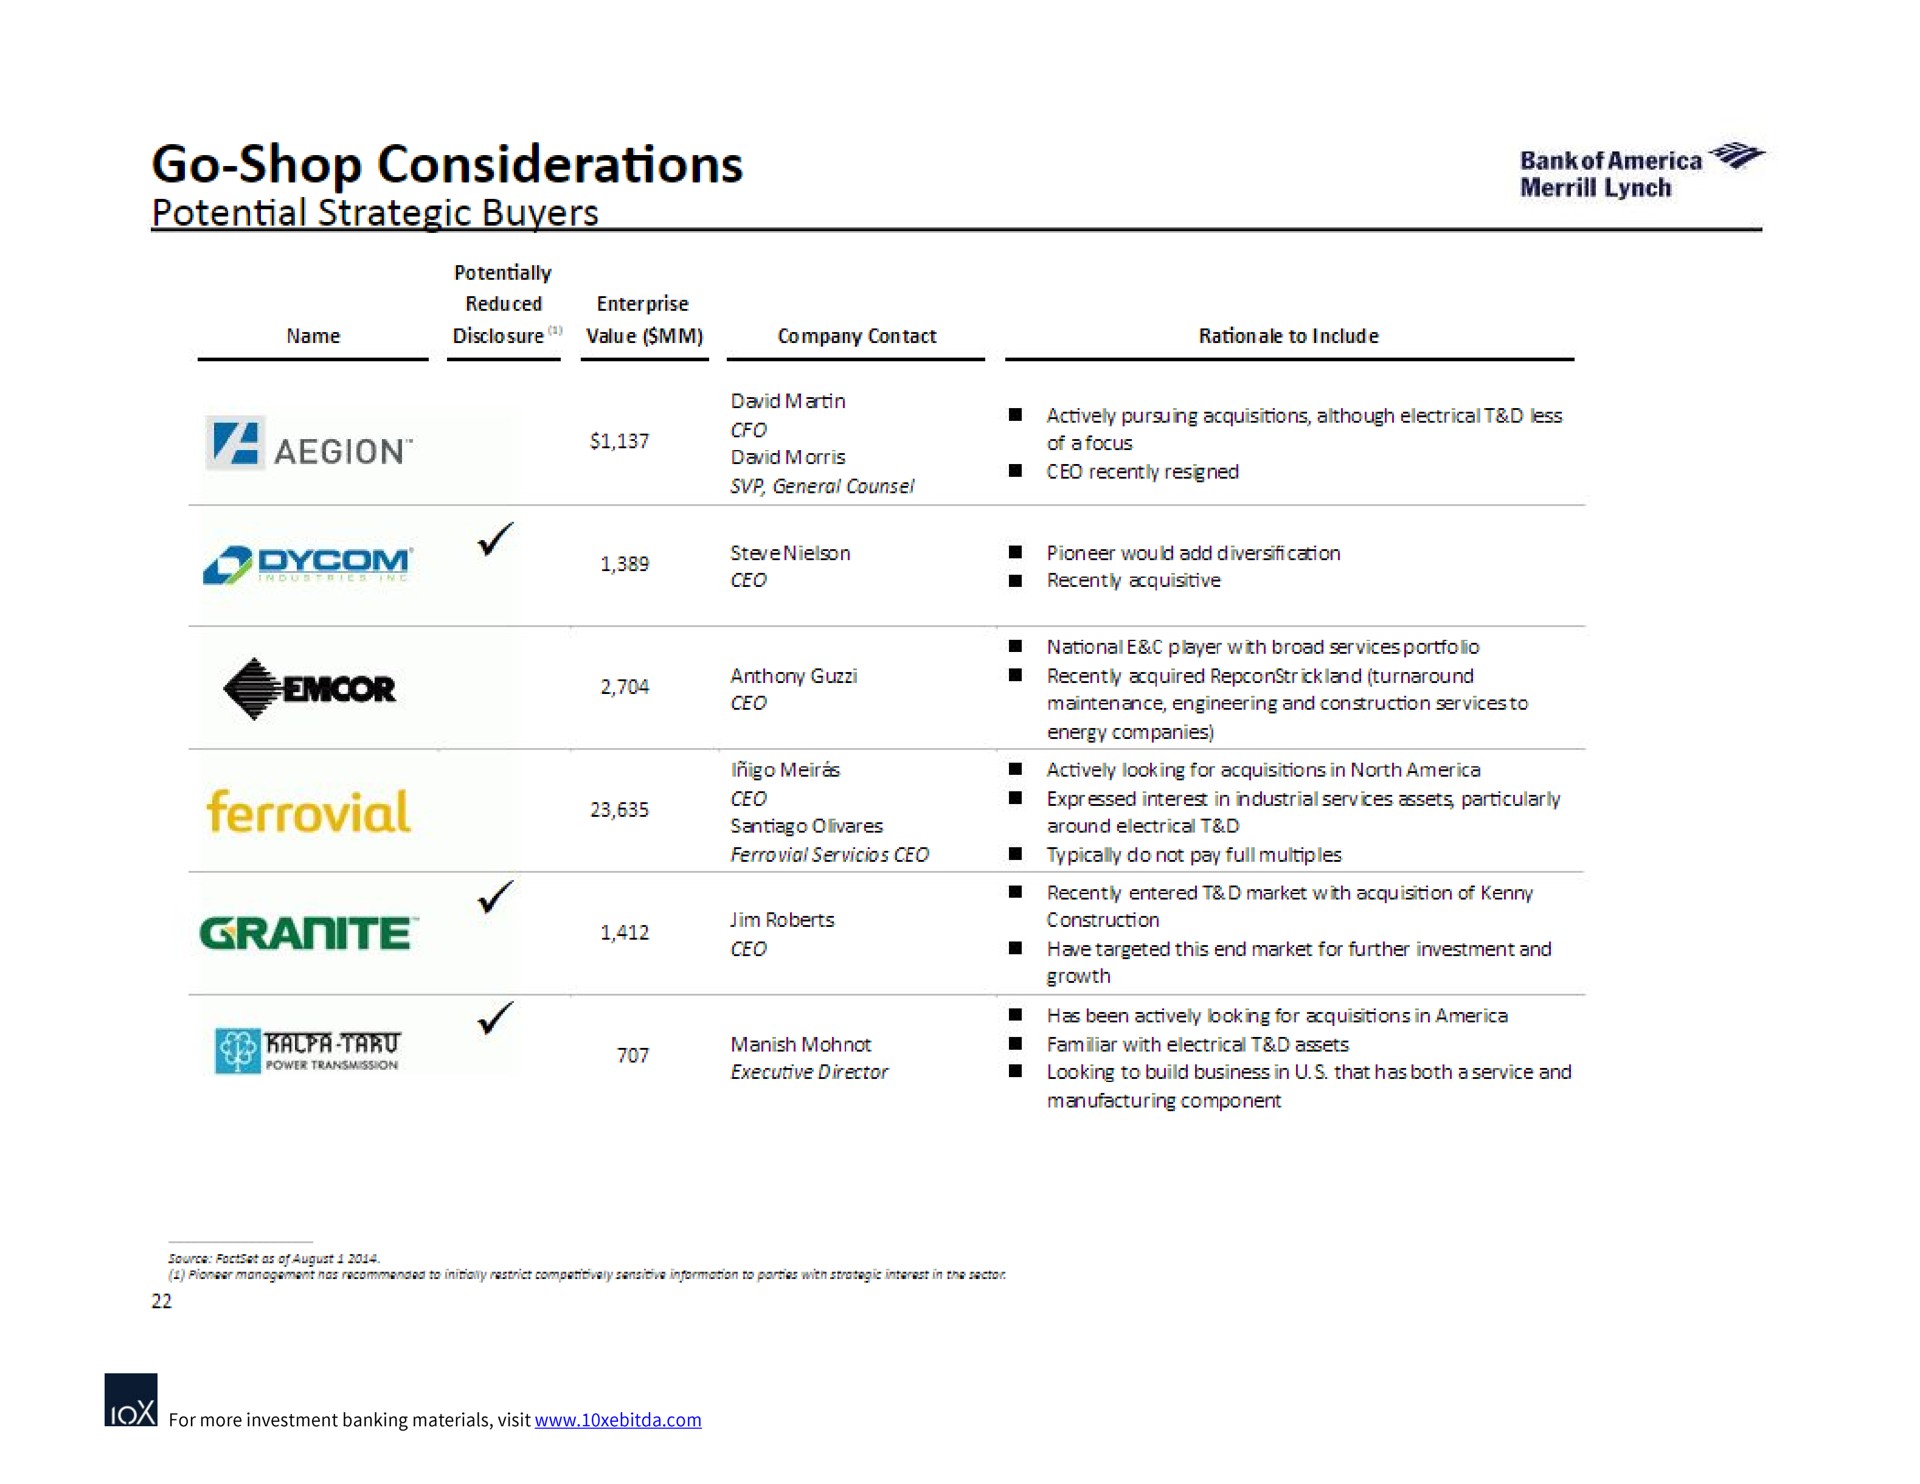 go shop considerations potential strategic buyers granite back tart is | Bank of America